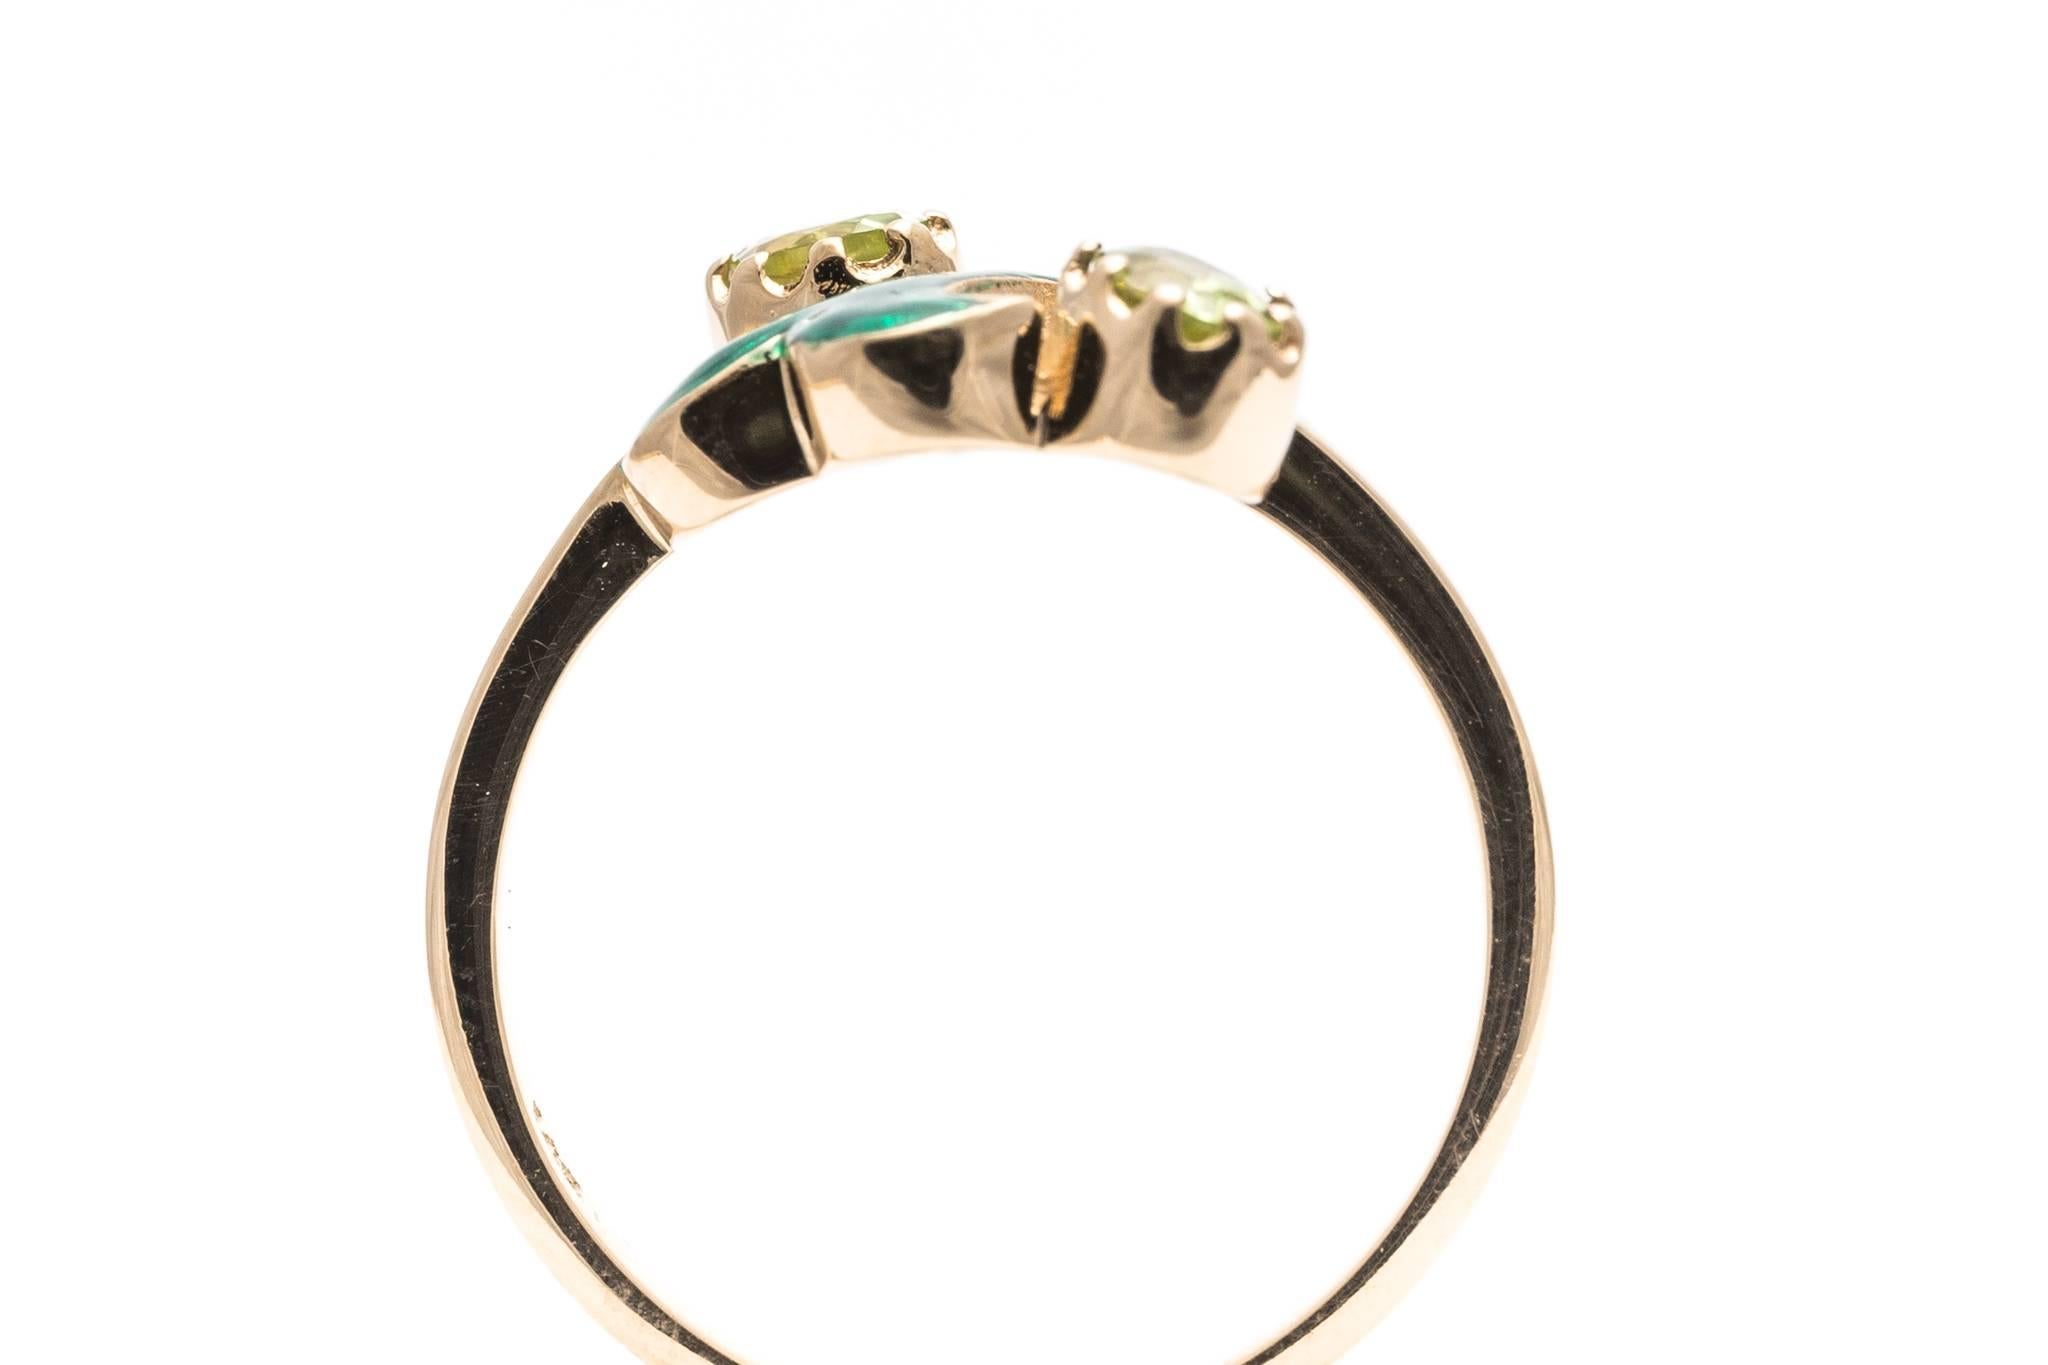  Peridot and Enamel Flower Ring in Yellow Gold 1